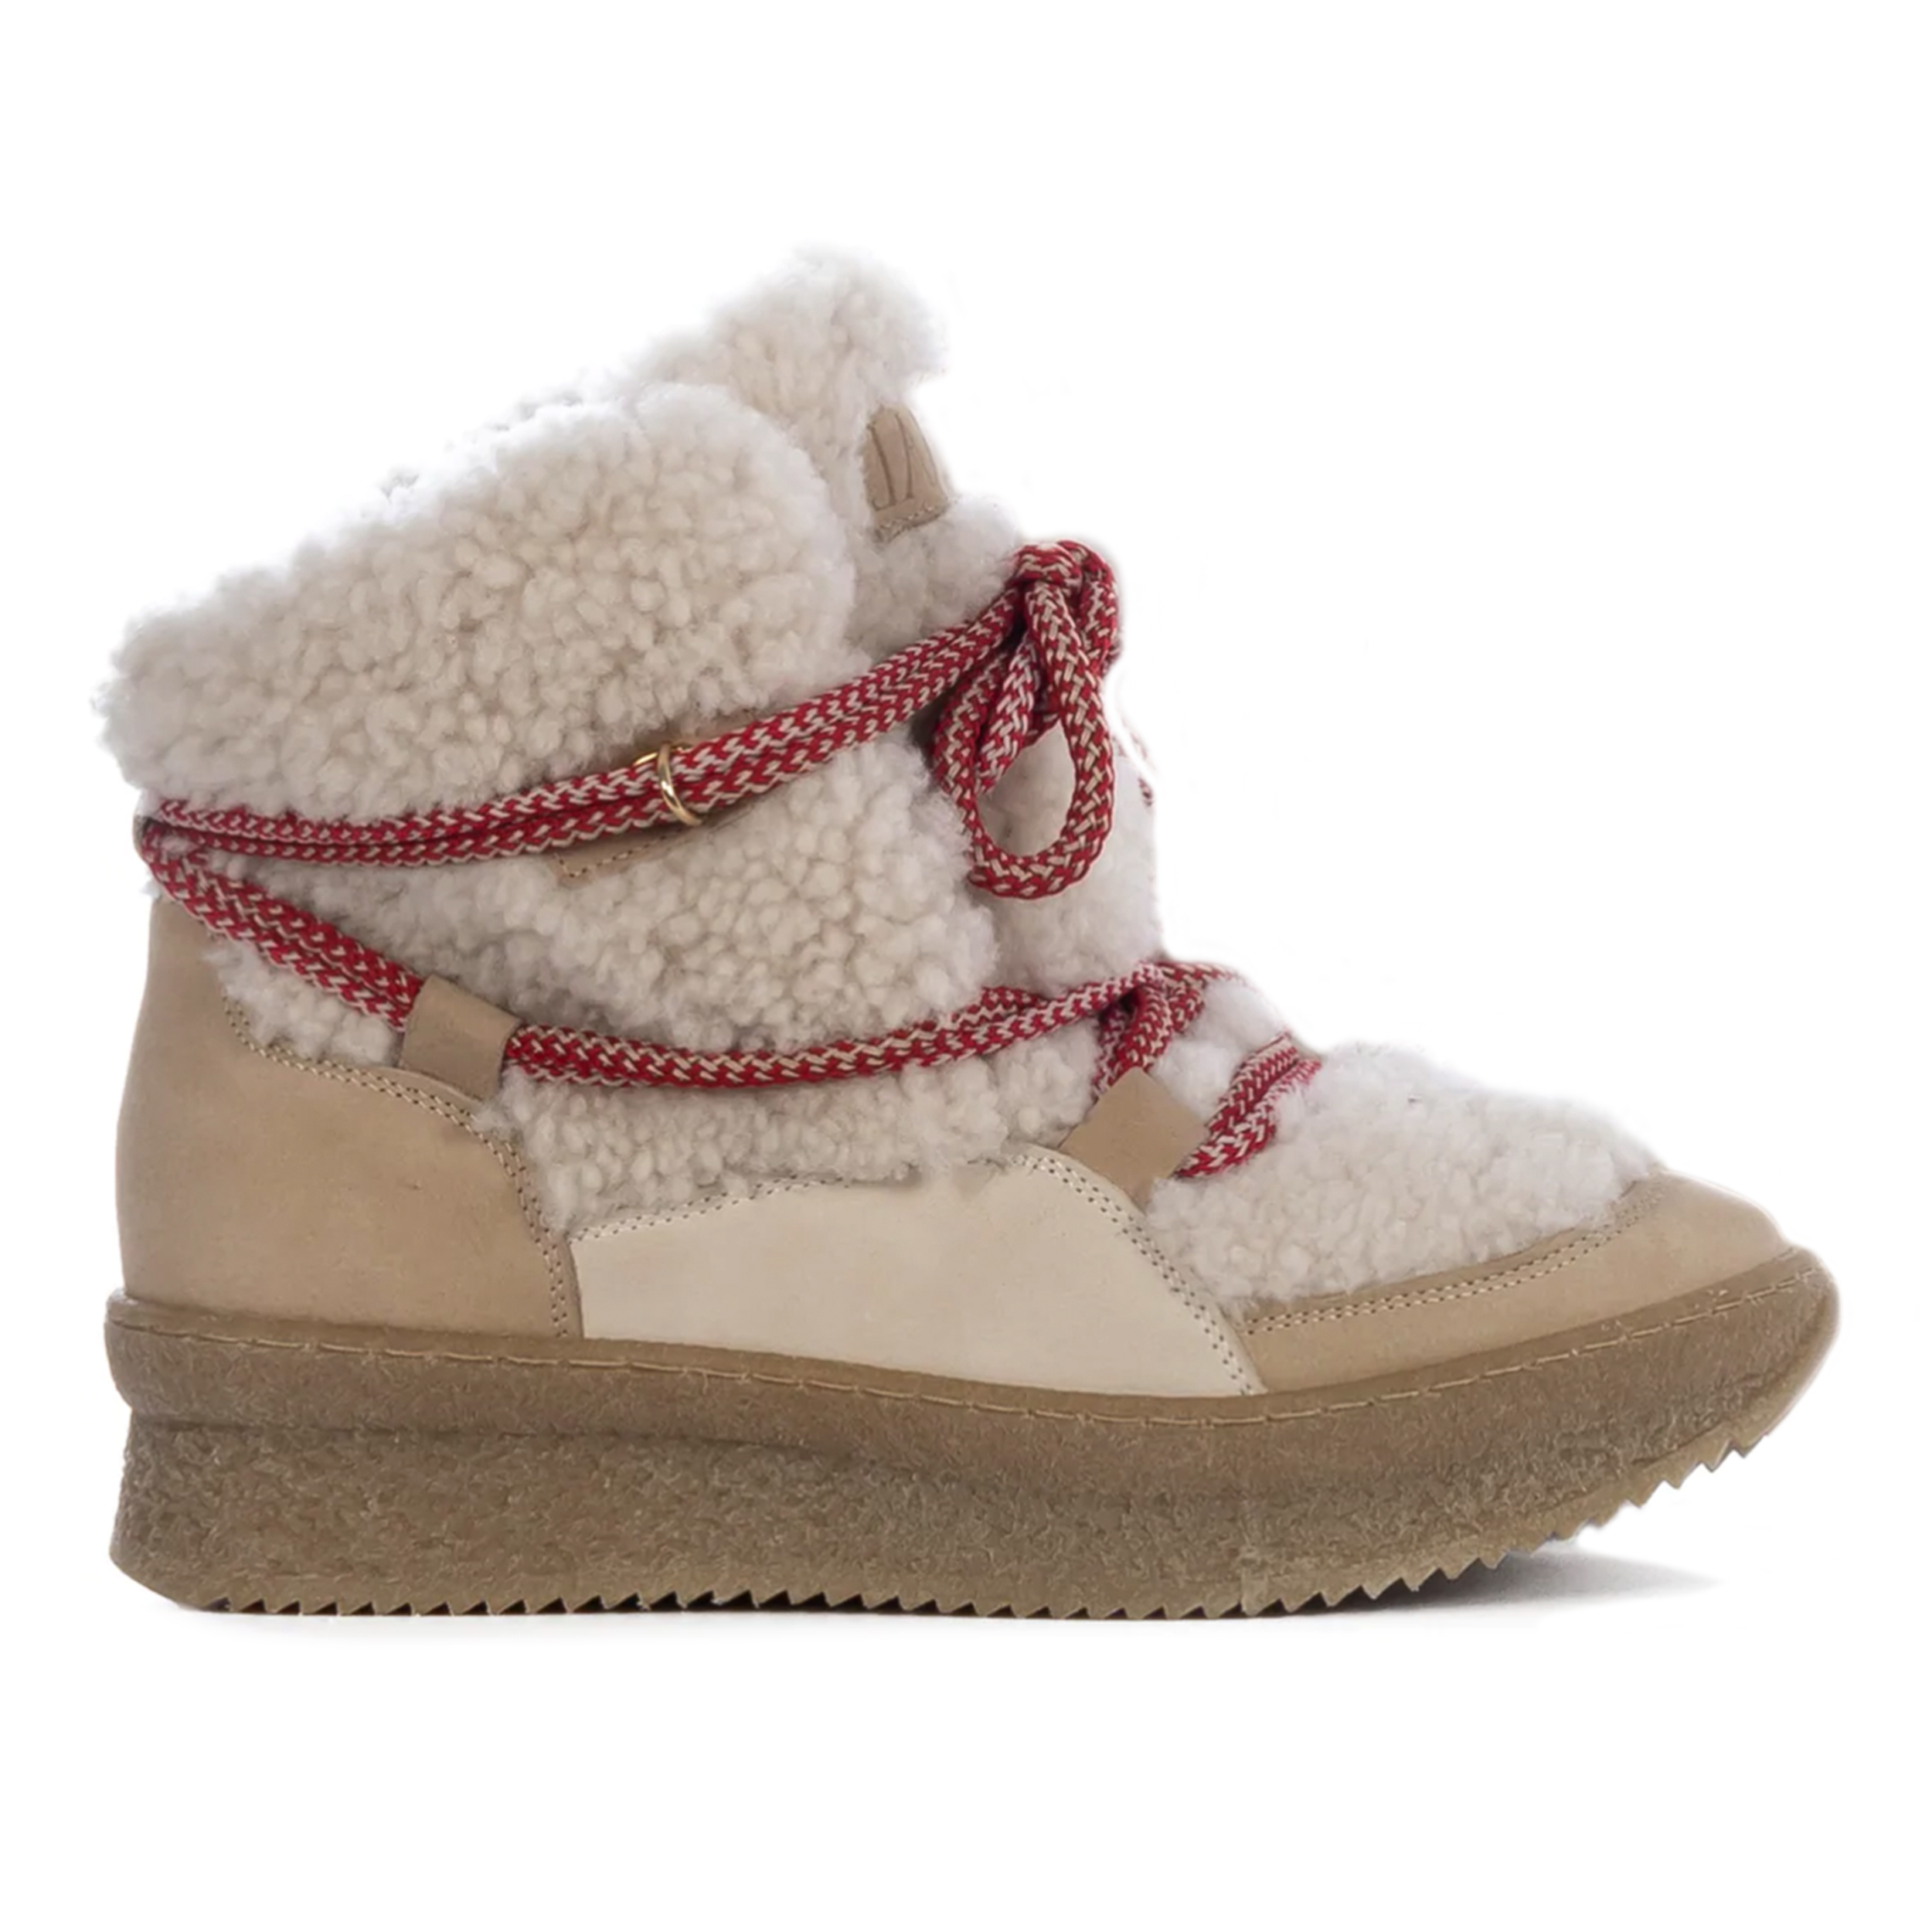 Toral Boot Teddy Taupe/Aglio/Offwhite